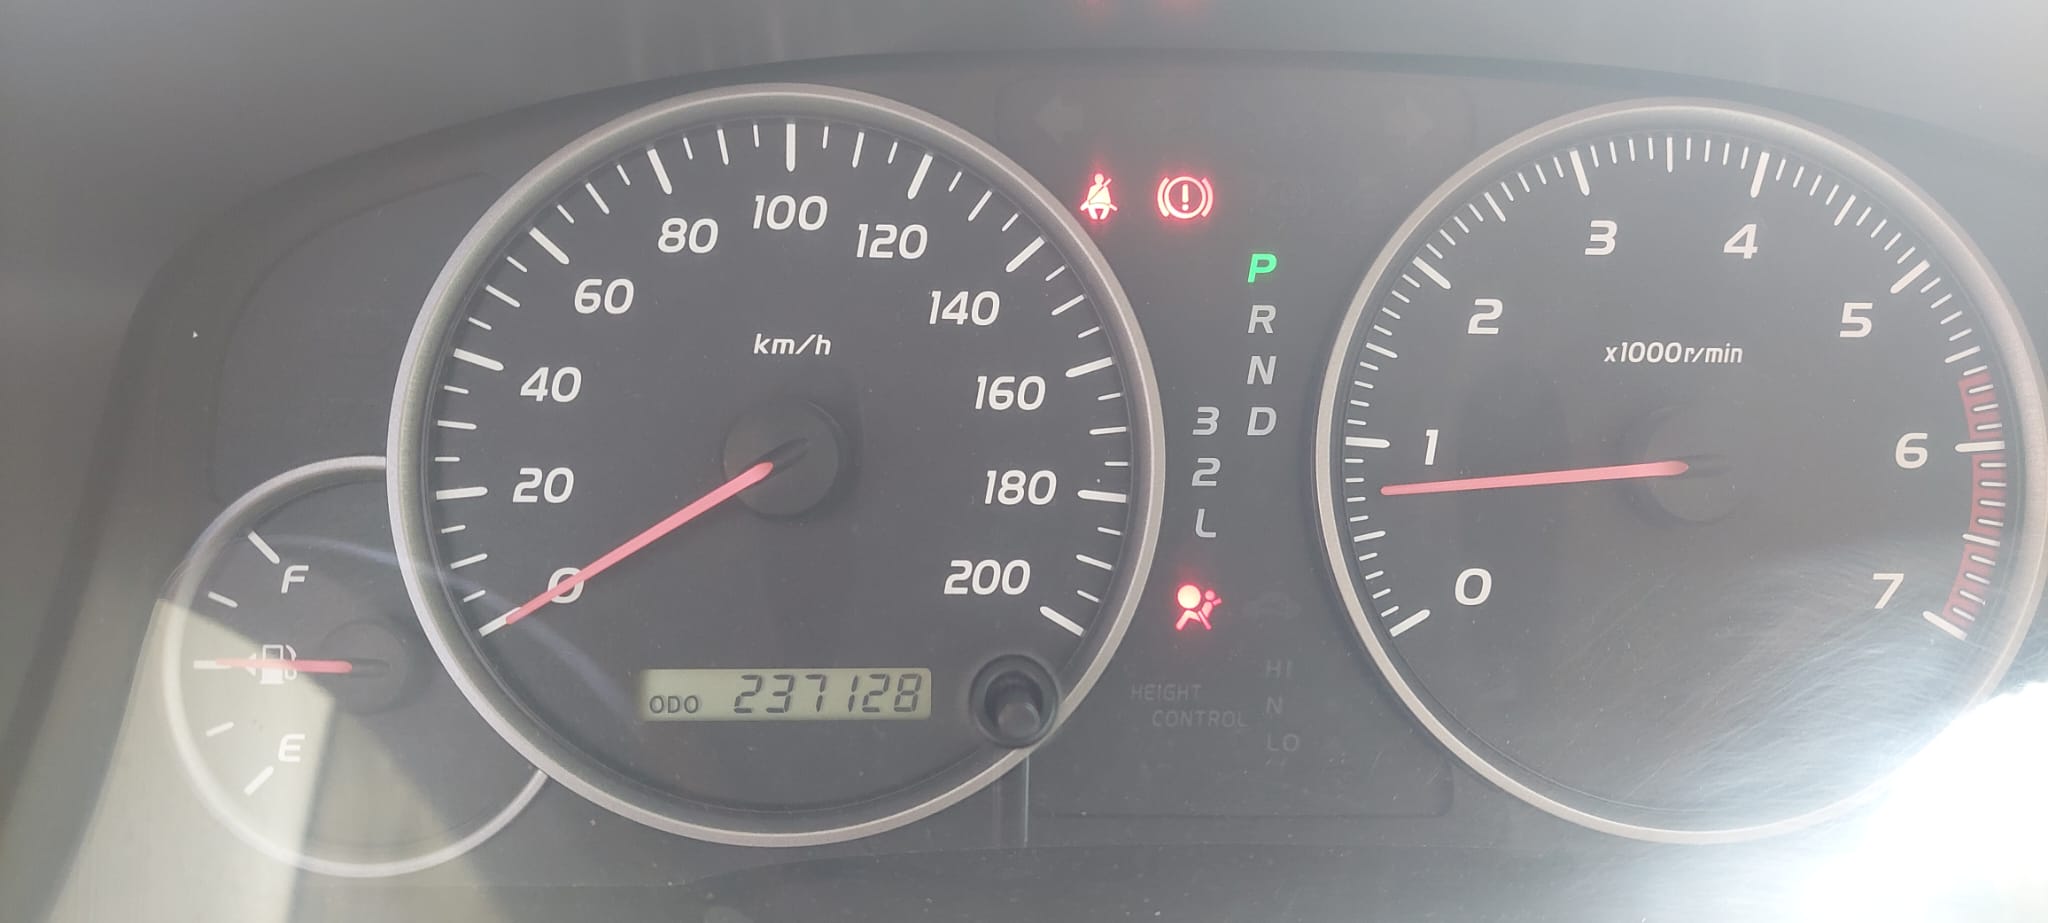 WELL MAINTAINED 2008 PRADO 4 cylinder